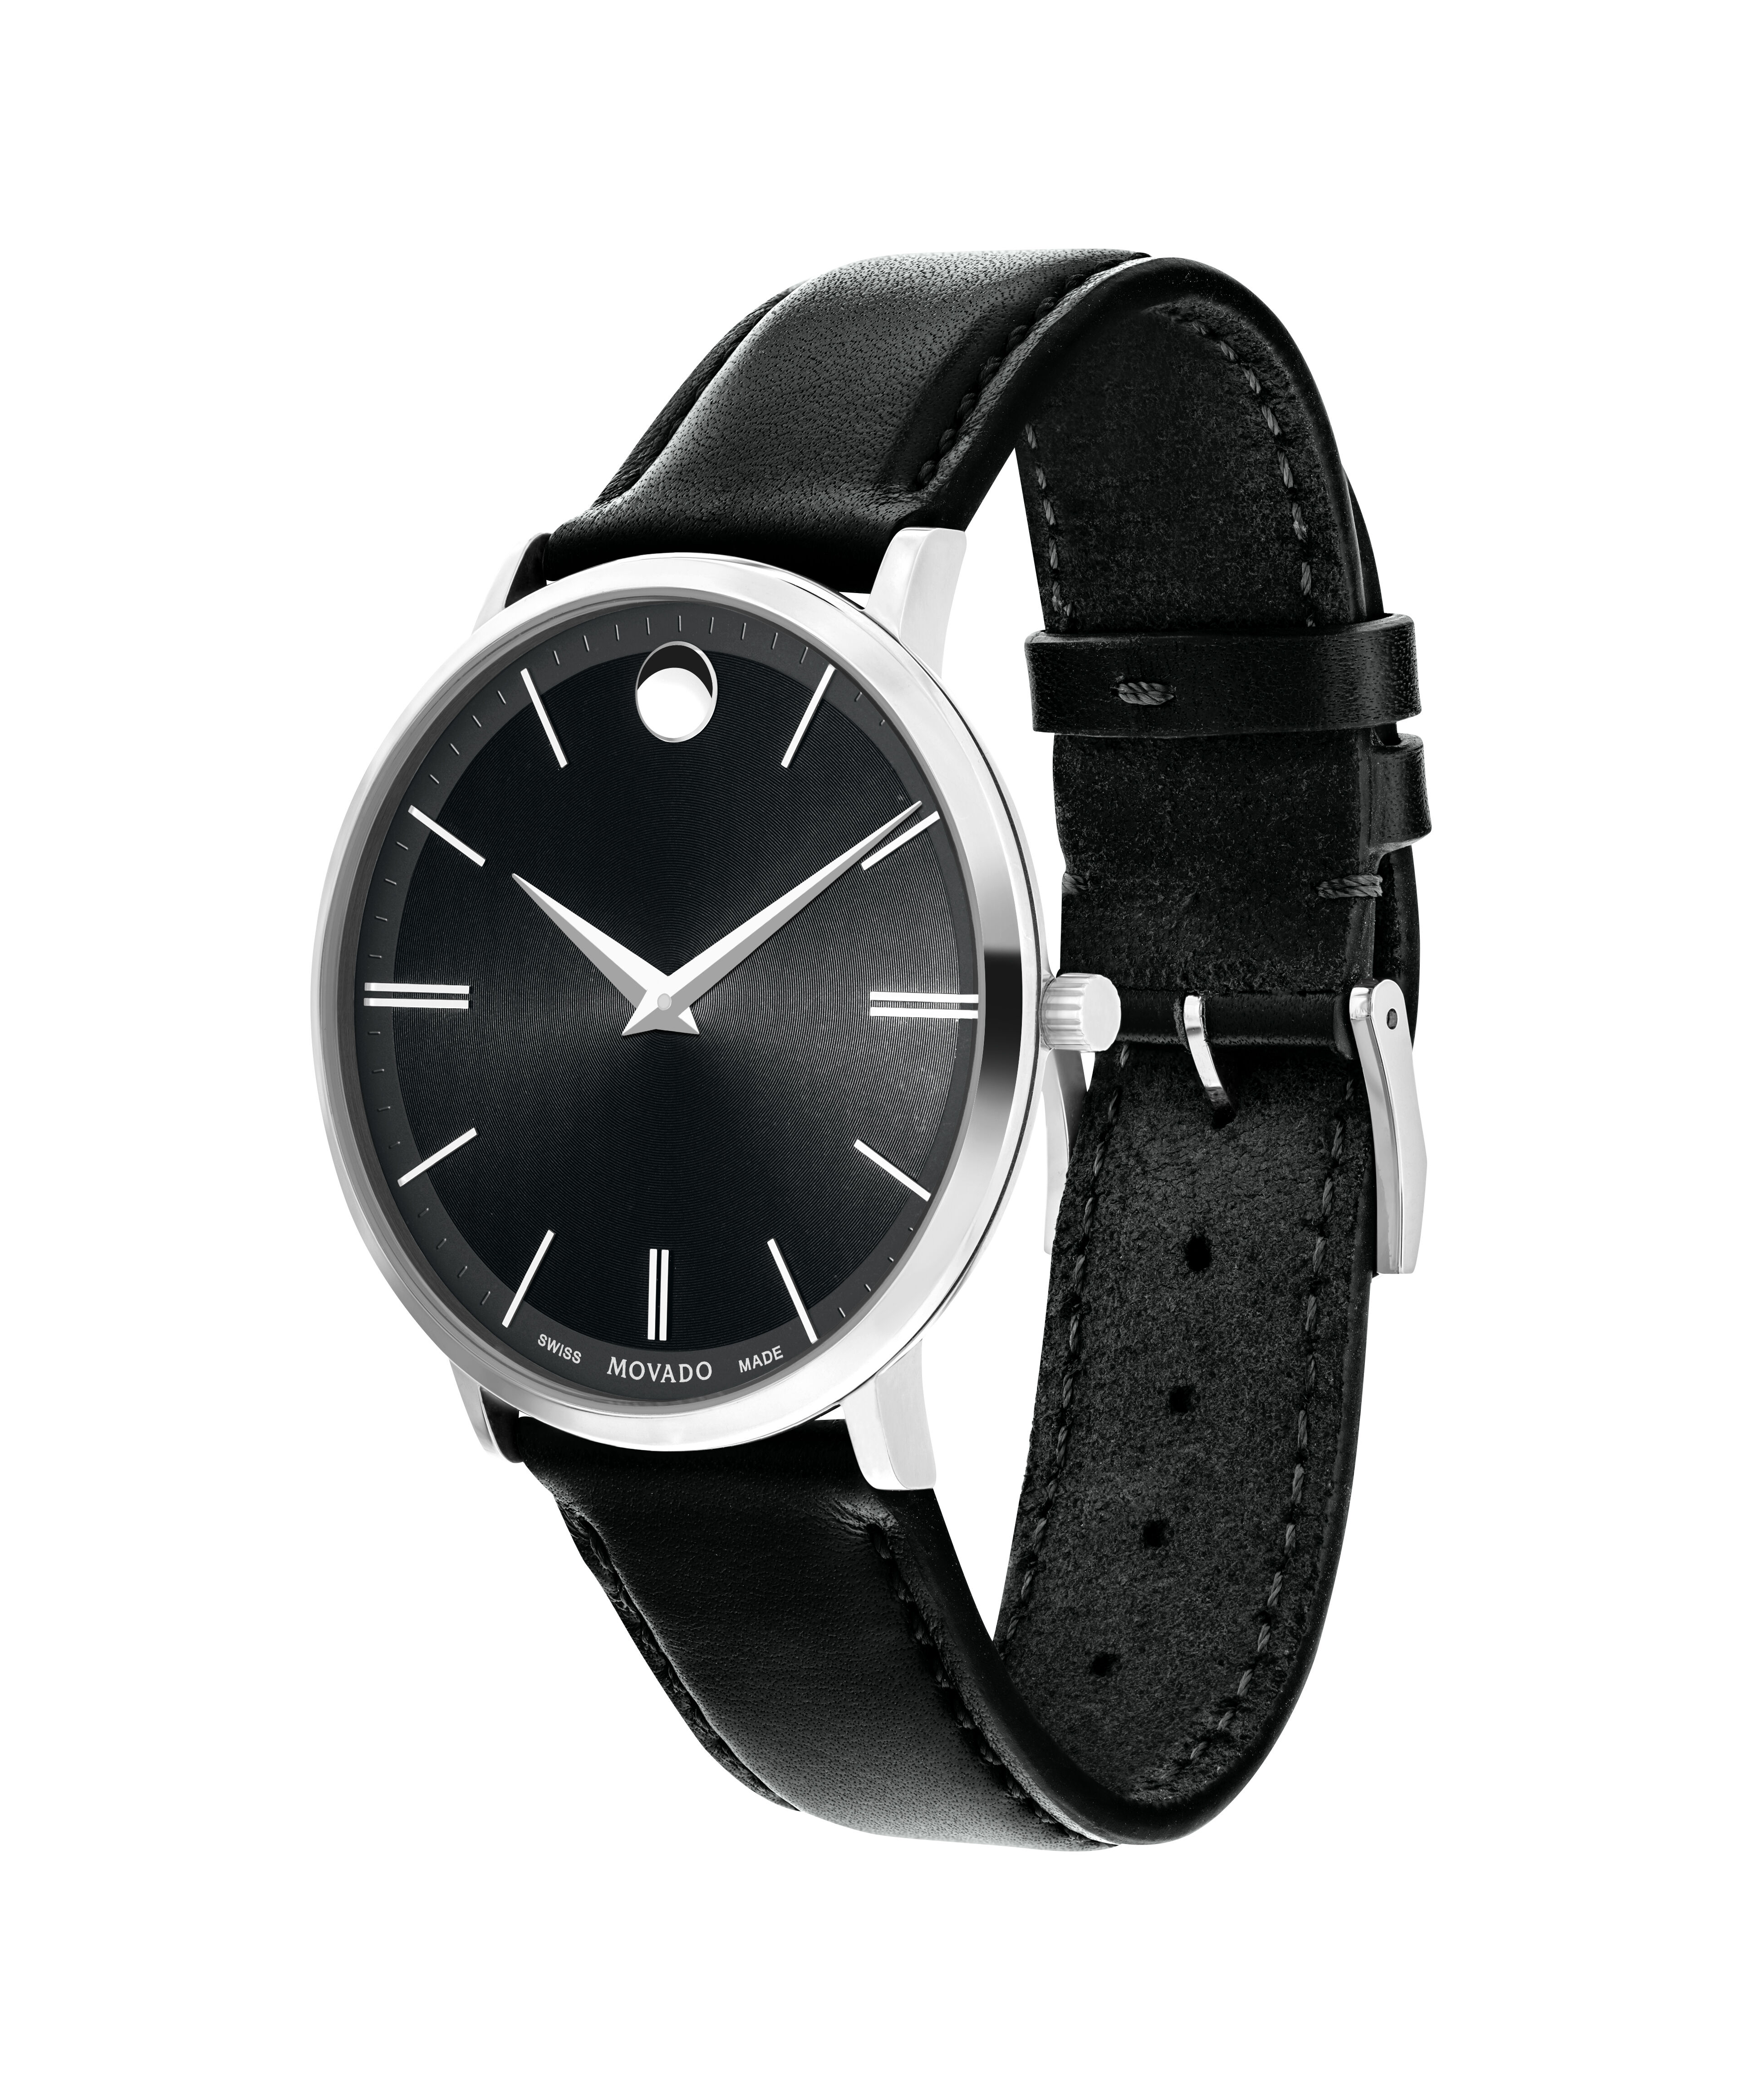 Movado Museum Classic Contemporary Steel Dial Black 25 mm. Ref. 84-01-827